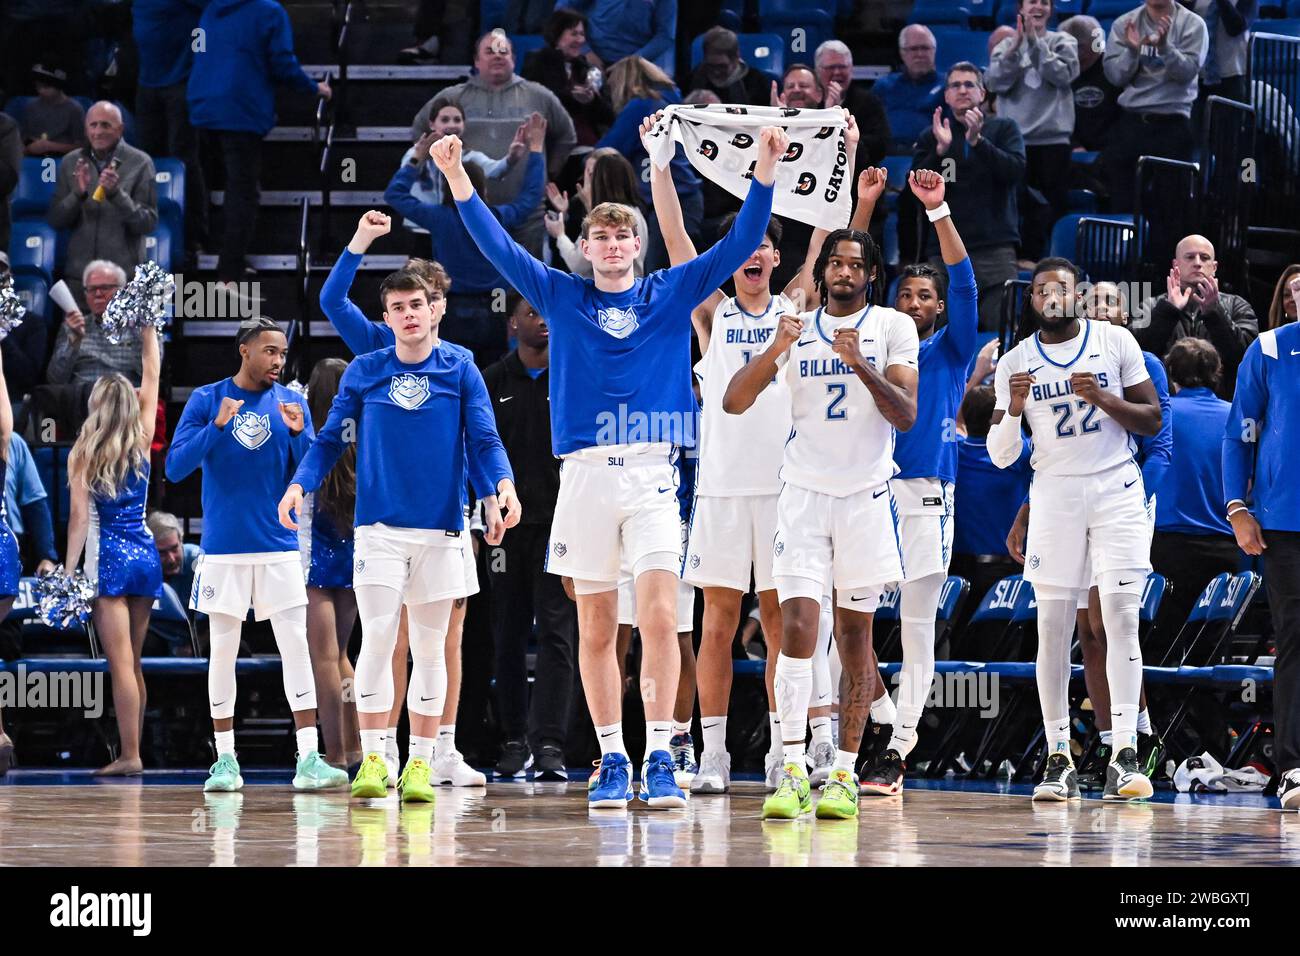 January 10 2024 The Saint Louis Billikens Celebrate Their Victory In A Regular Season Game Where The Saint Josephs Hawks Visited The St Louis Billikens Held At Chaifetz Arena In St Louis Mo On Wednesday January 10 2024 Richard Ulreichcsm 2WBGXTJ 